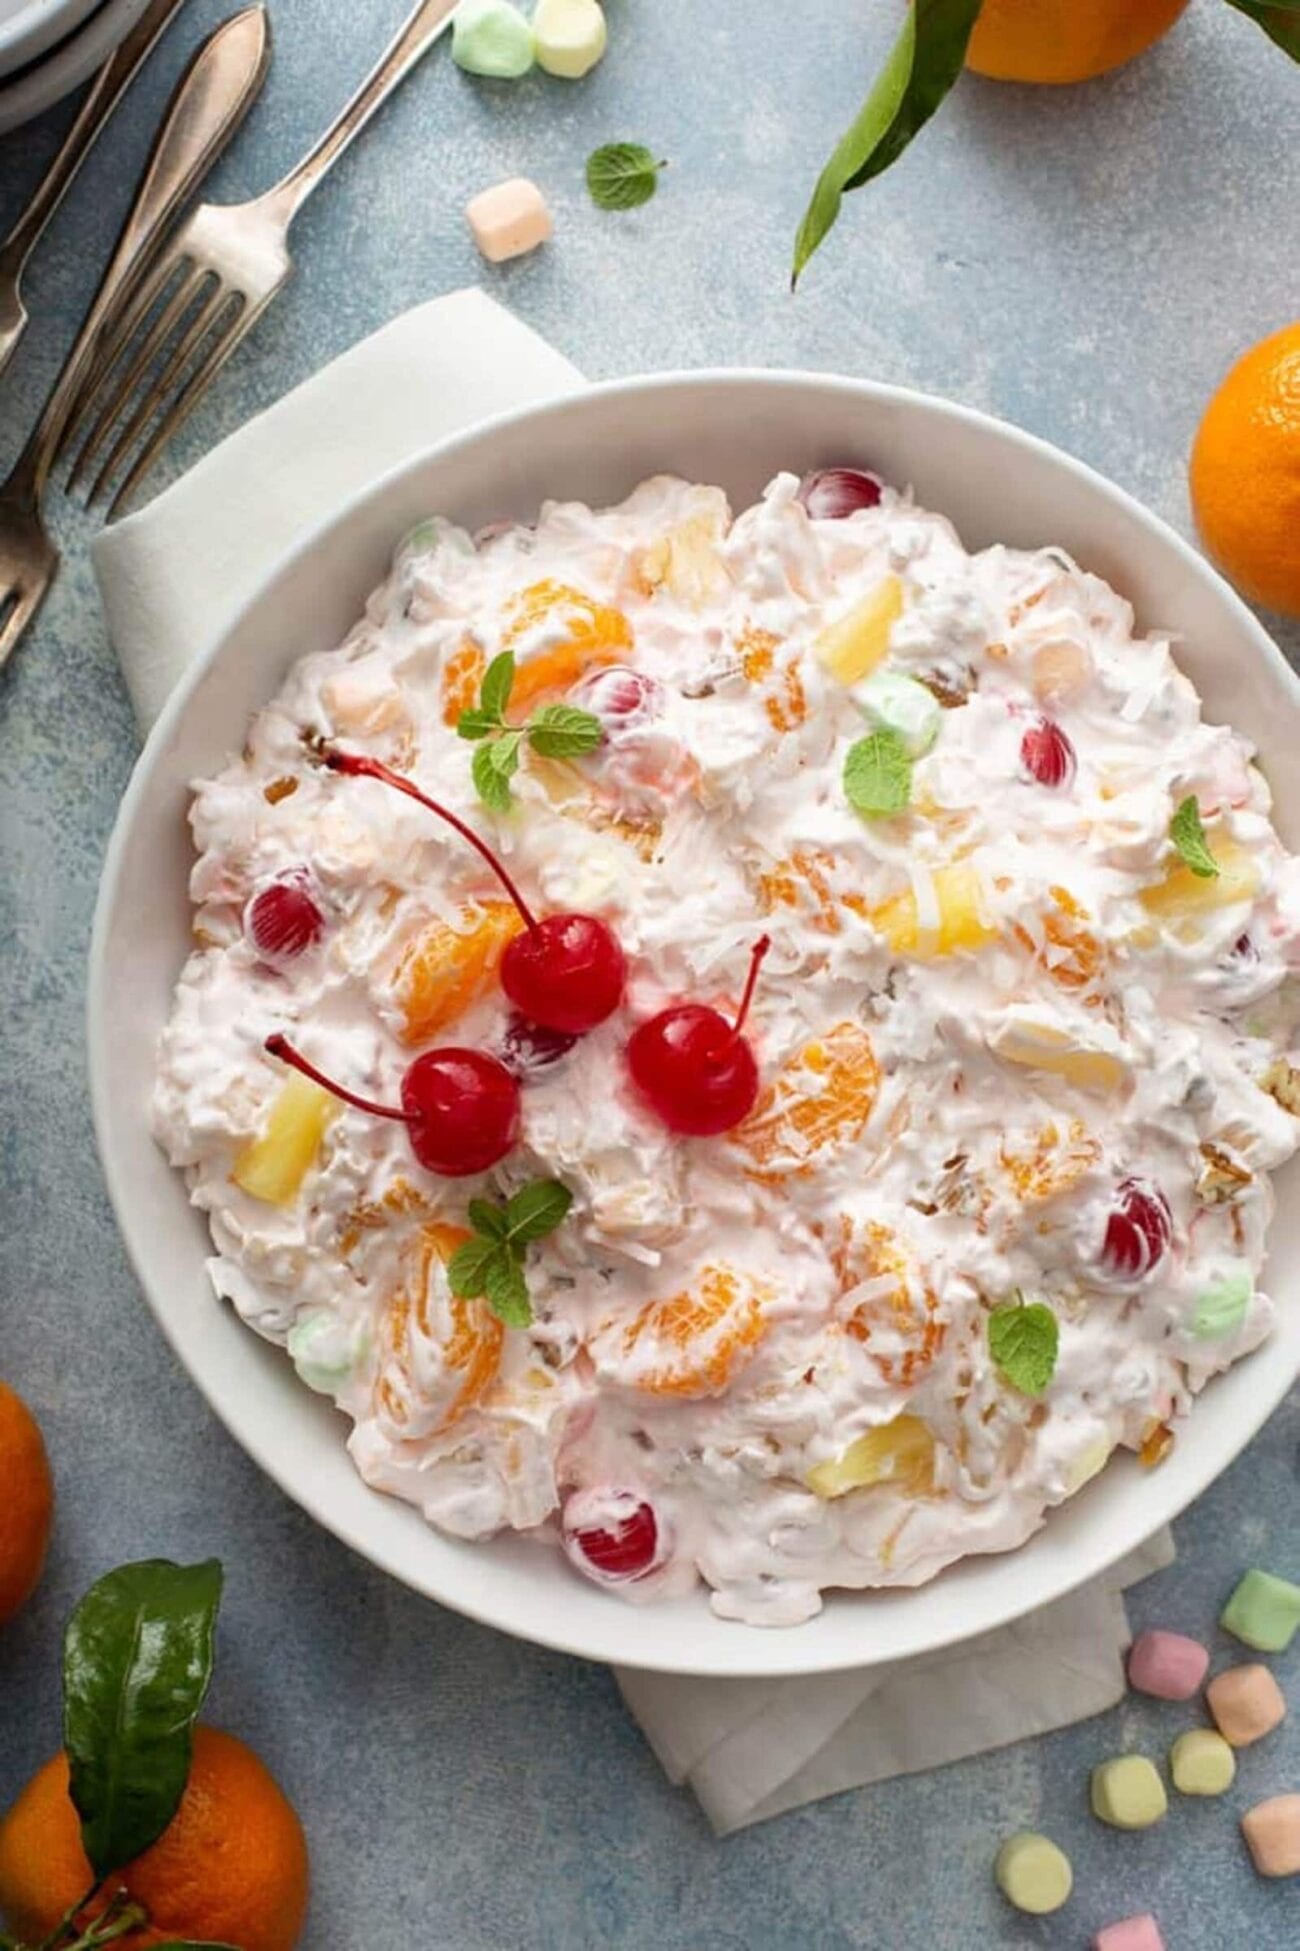 In the mood for sweetness? Ambrosia fruit salad fresh from the fridge will cool you down for the day, so whip up these delicious recipes for a chilly treat.